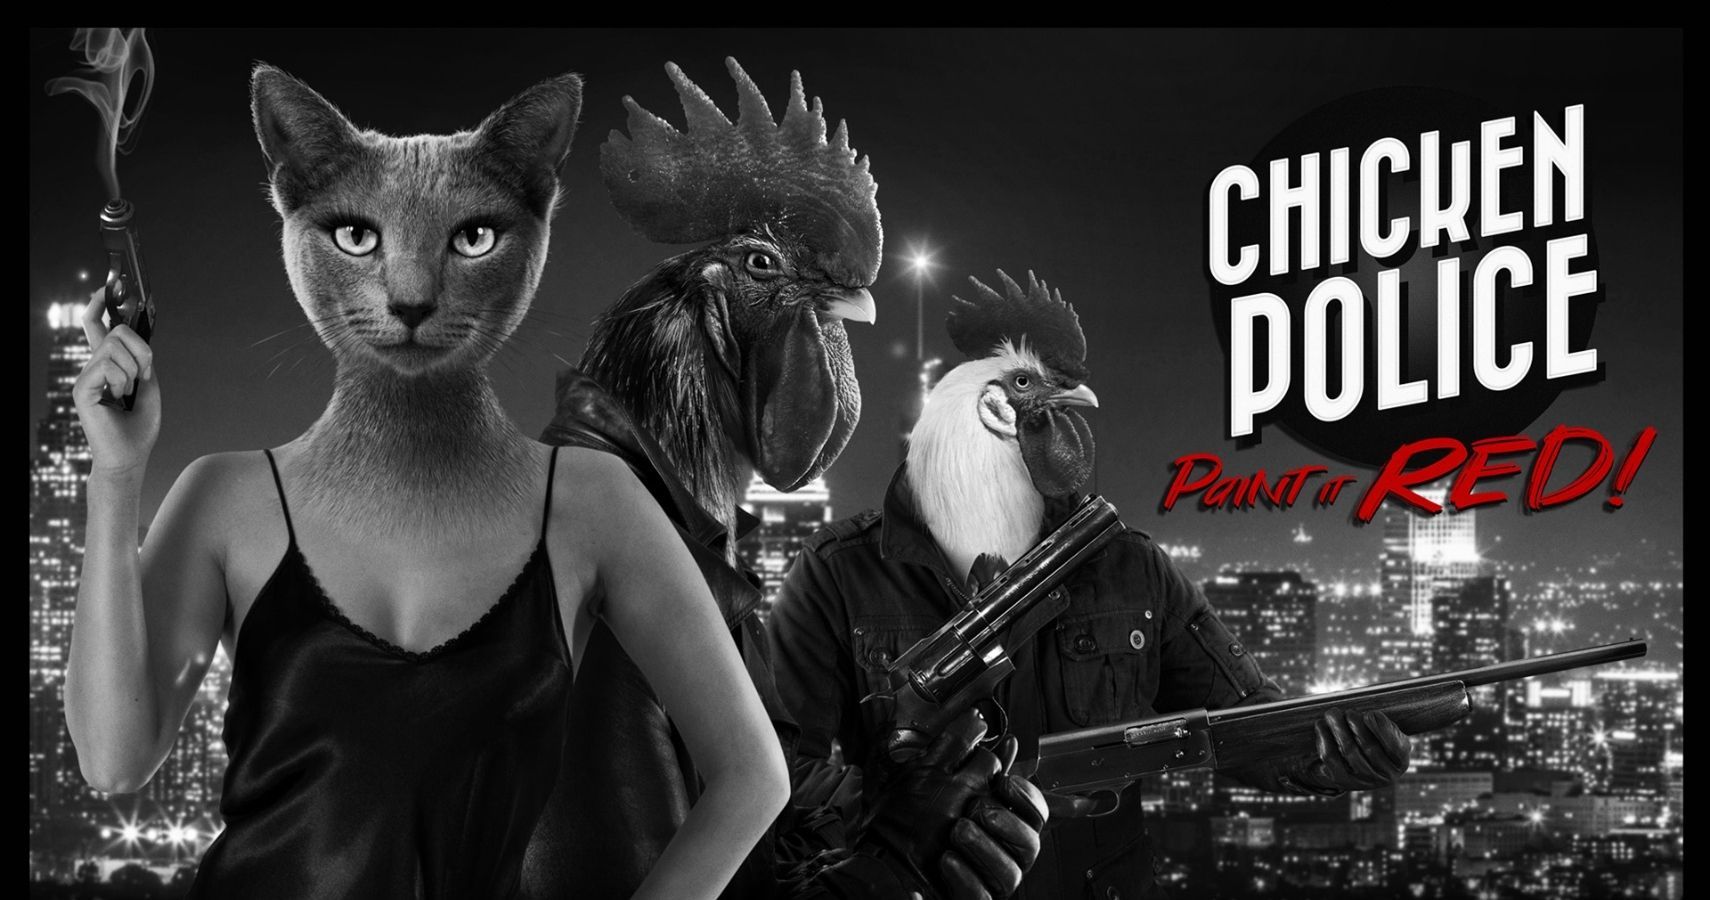 Chicken Police Paint It Red Release Announcement feature image